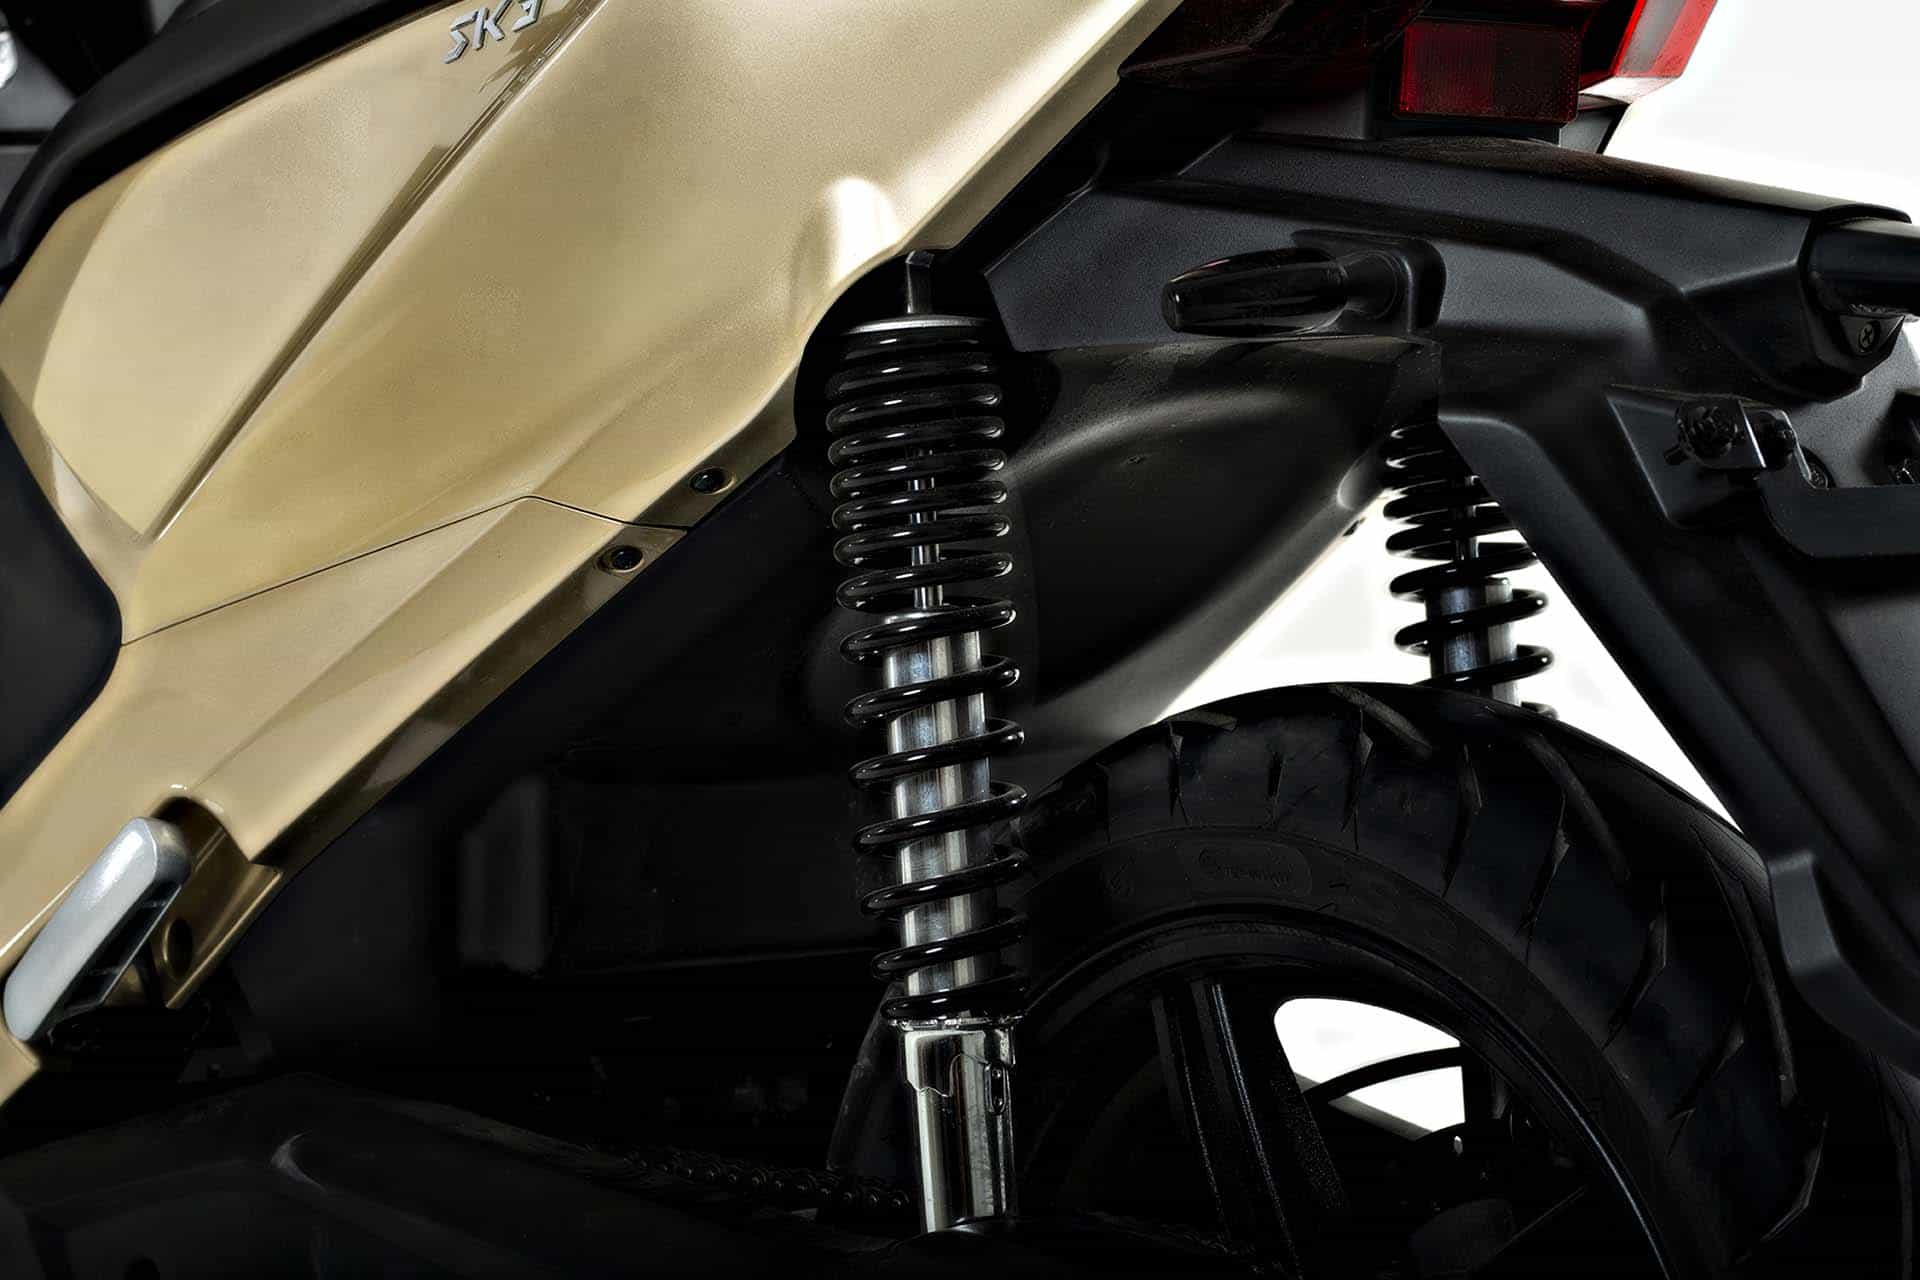 Suspension springs on gold SK3 scooter